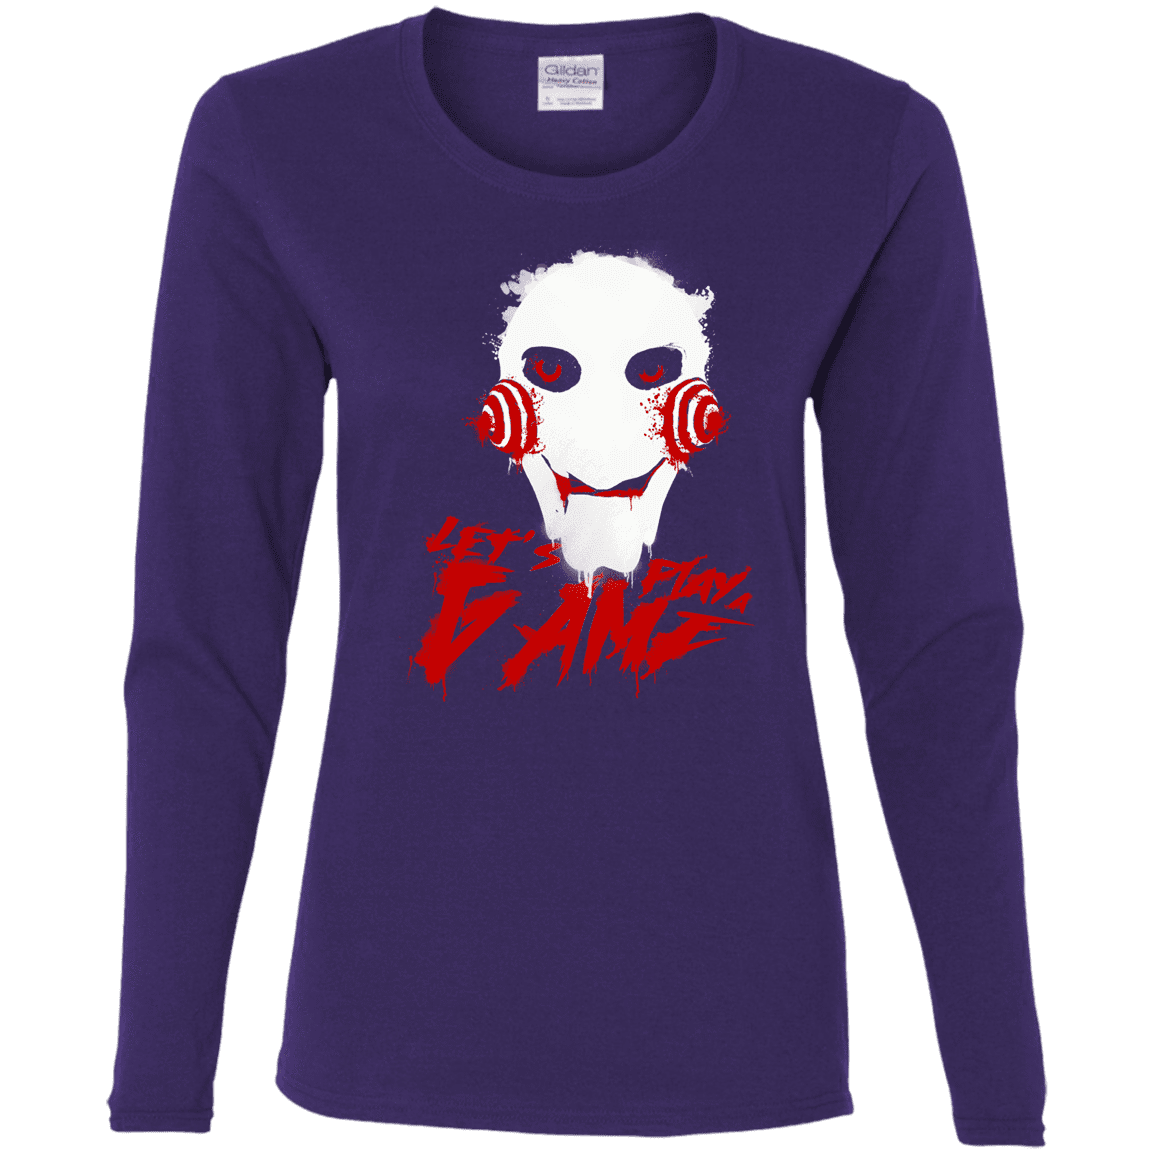 T-Shirts Purple / S Let's Play A Game Women's Long Sleeve T-Shirt